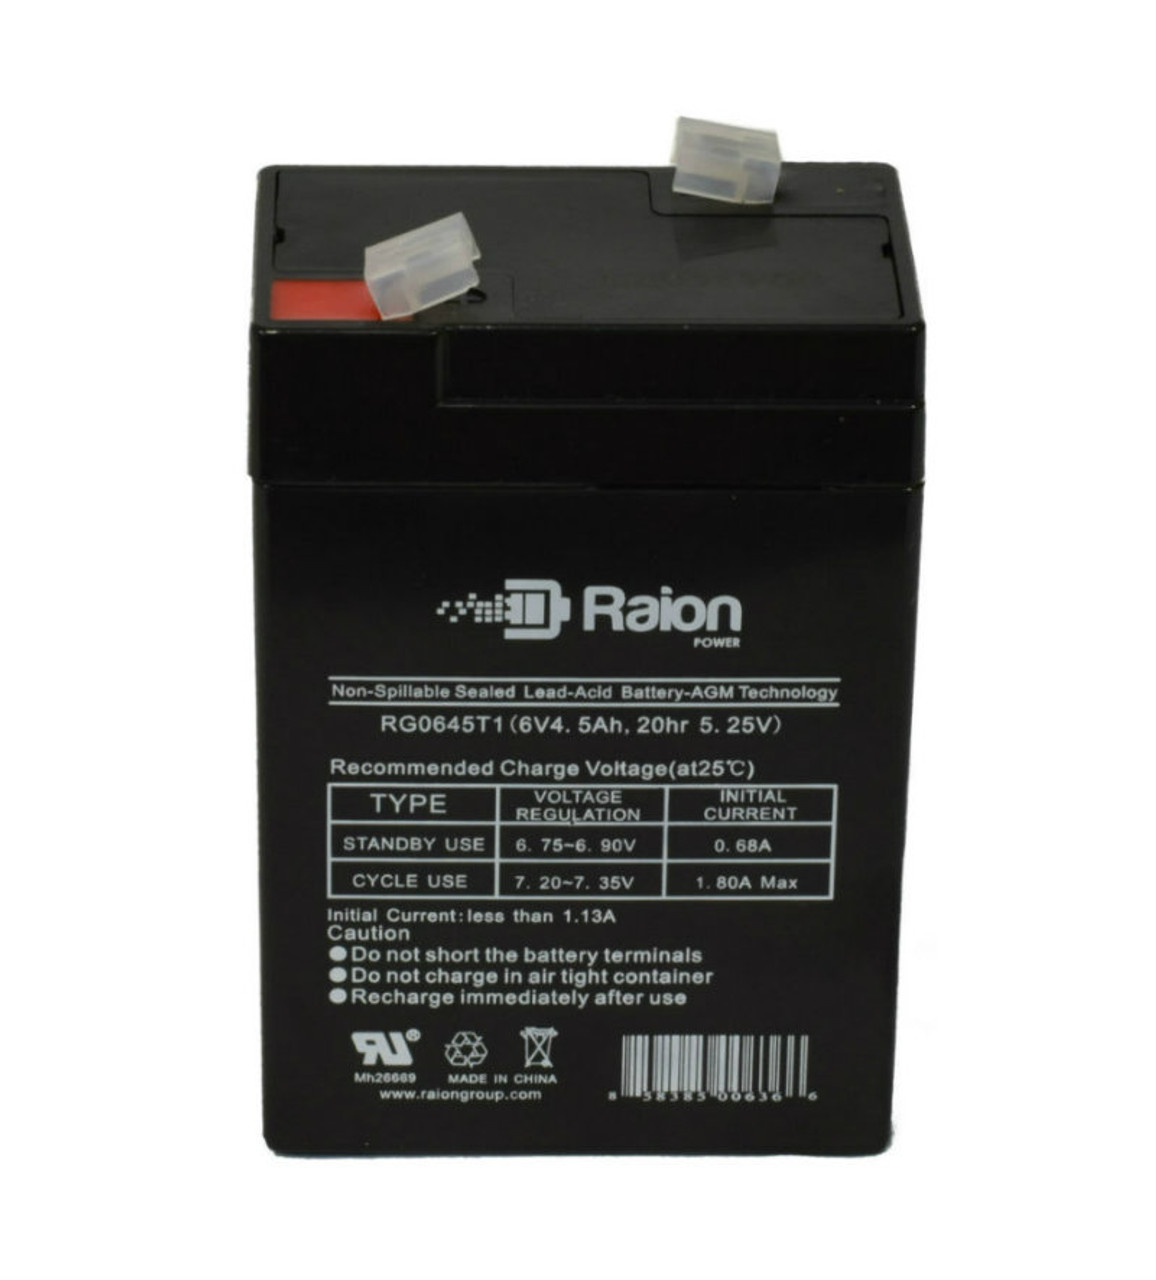 Raion Power RG0645T1 Replacement Battery Cartridge for Peg Perego IGED0913 6V Ducati 1098 Cycle